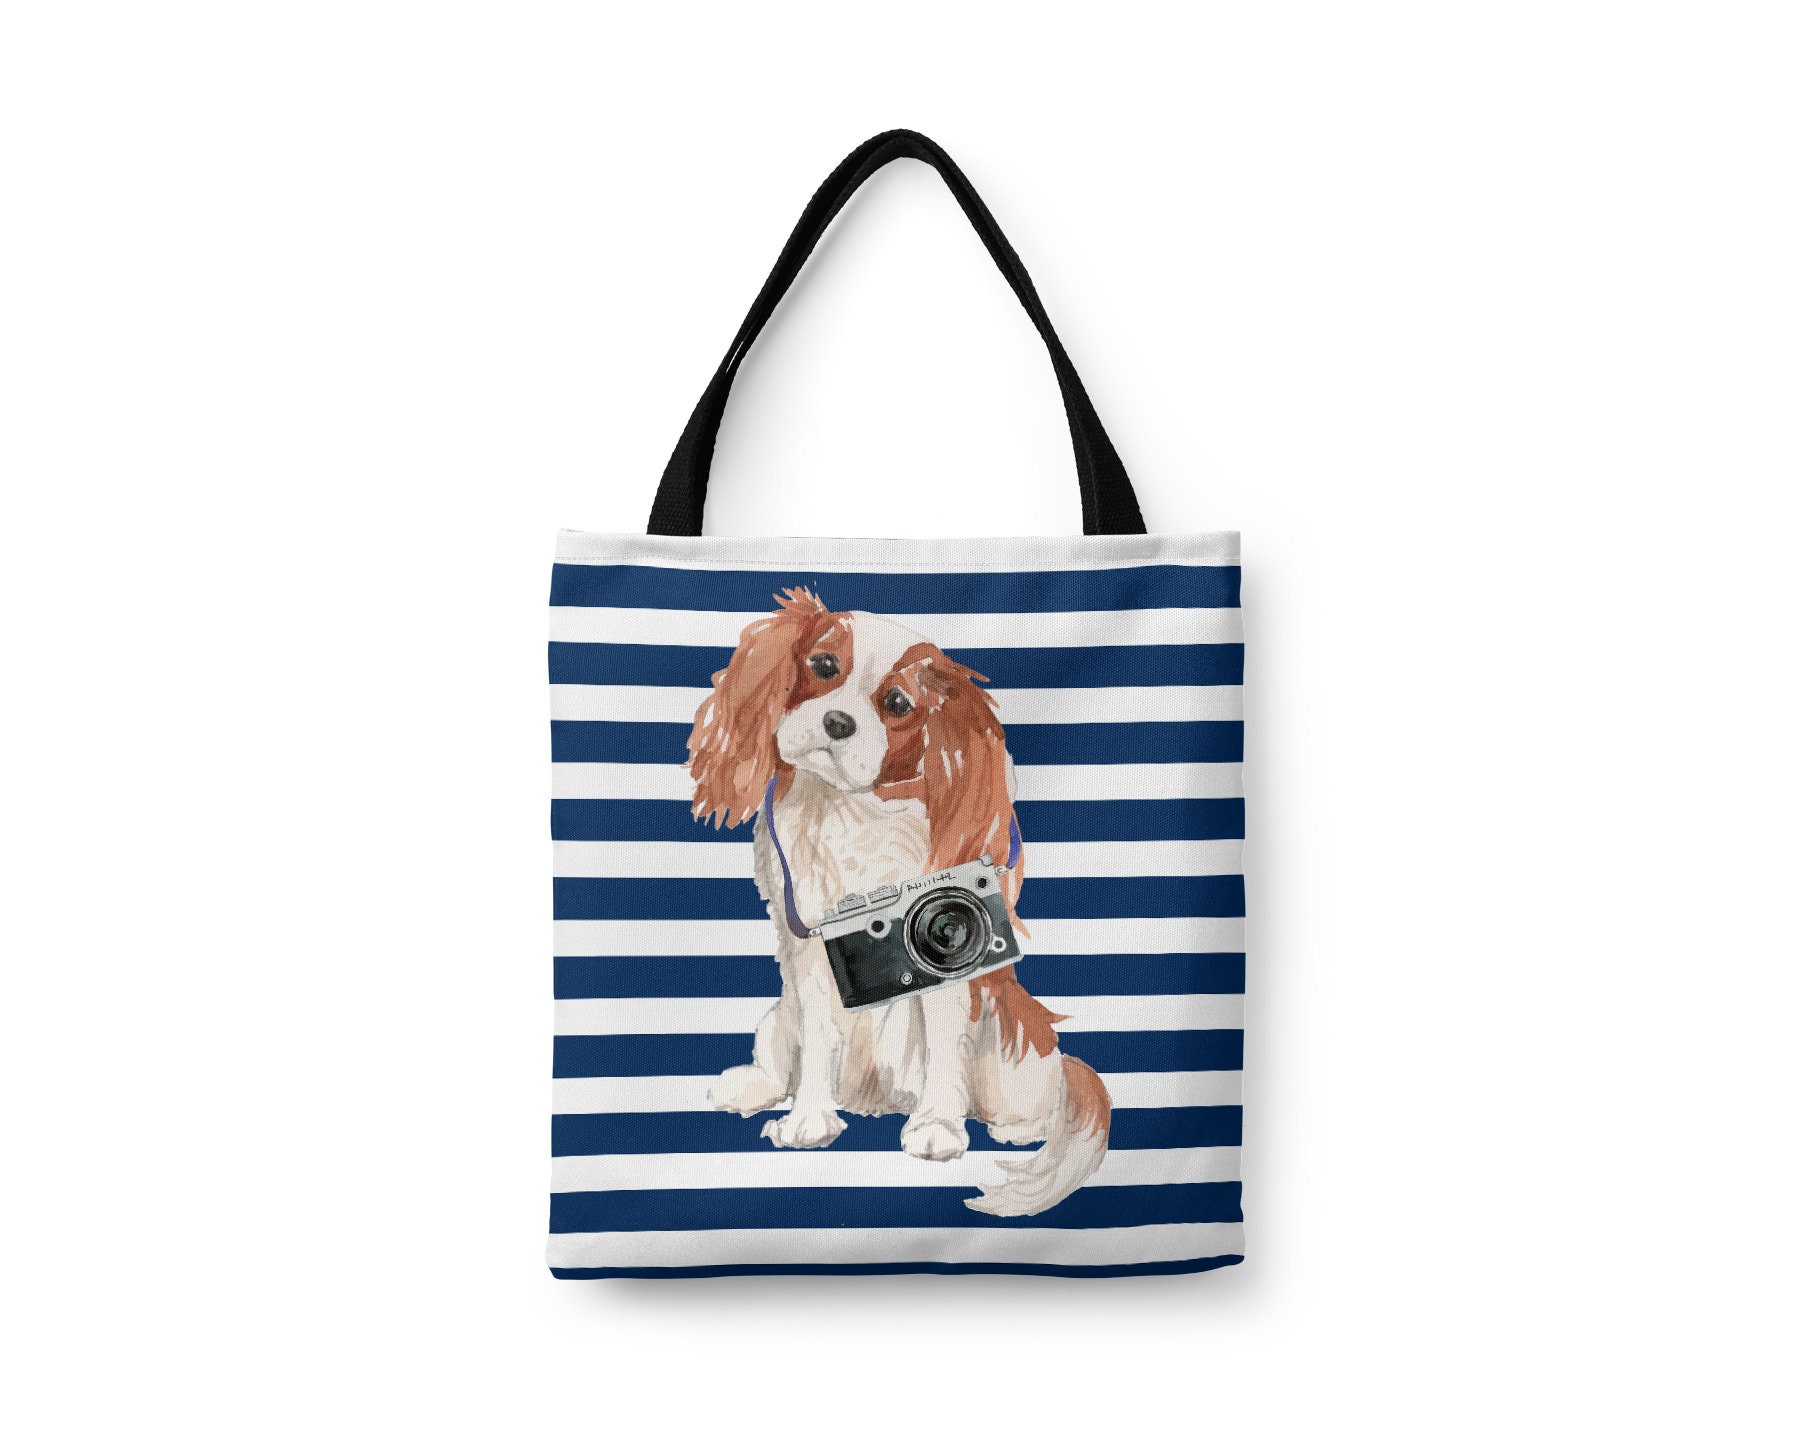 Cavalier King Charles Spaniel Tote Bag - Illustrated Dogs & 6 Travel Inspired Styles. All Purpose For Work, Shopping, Life. English